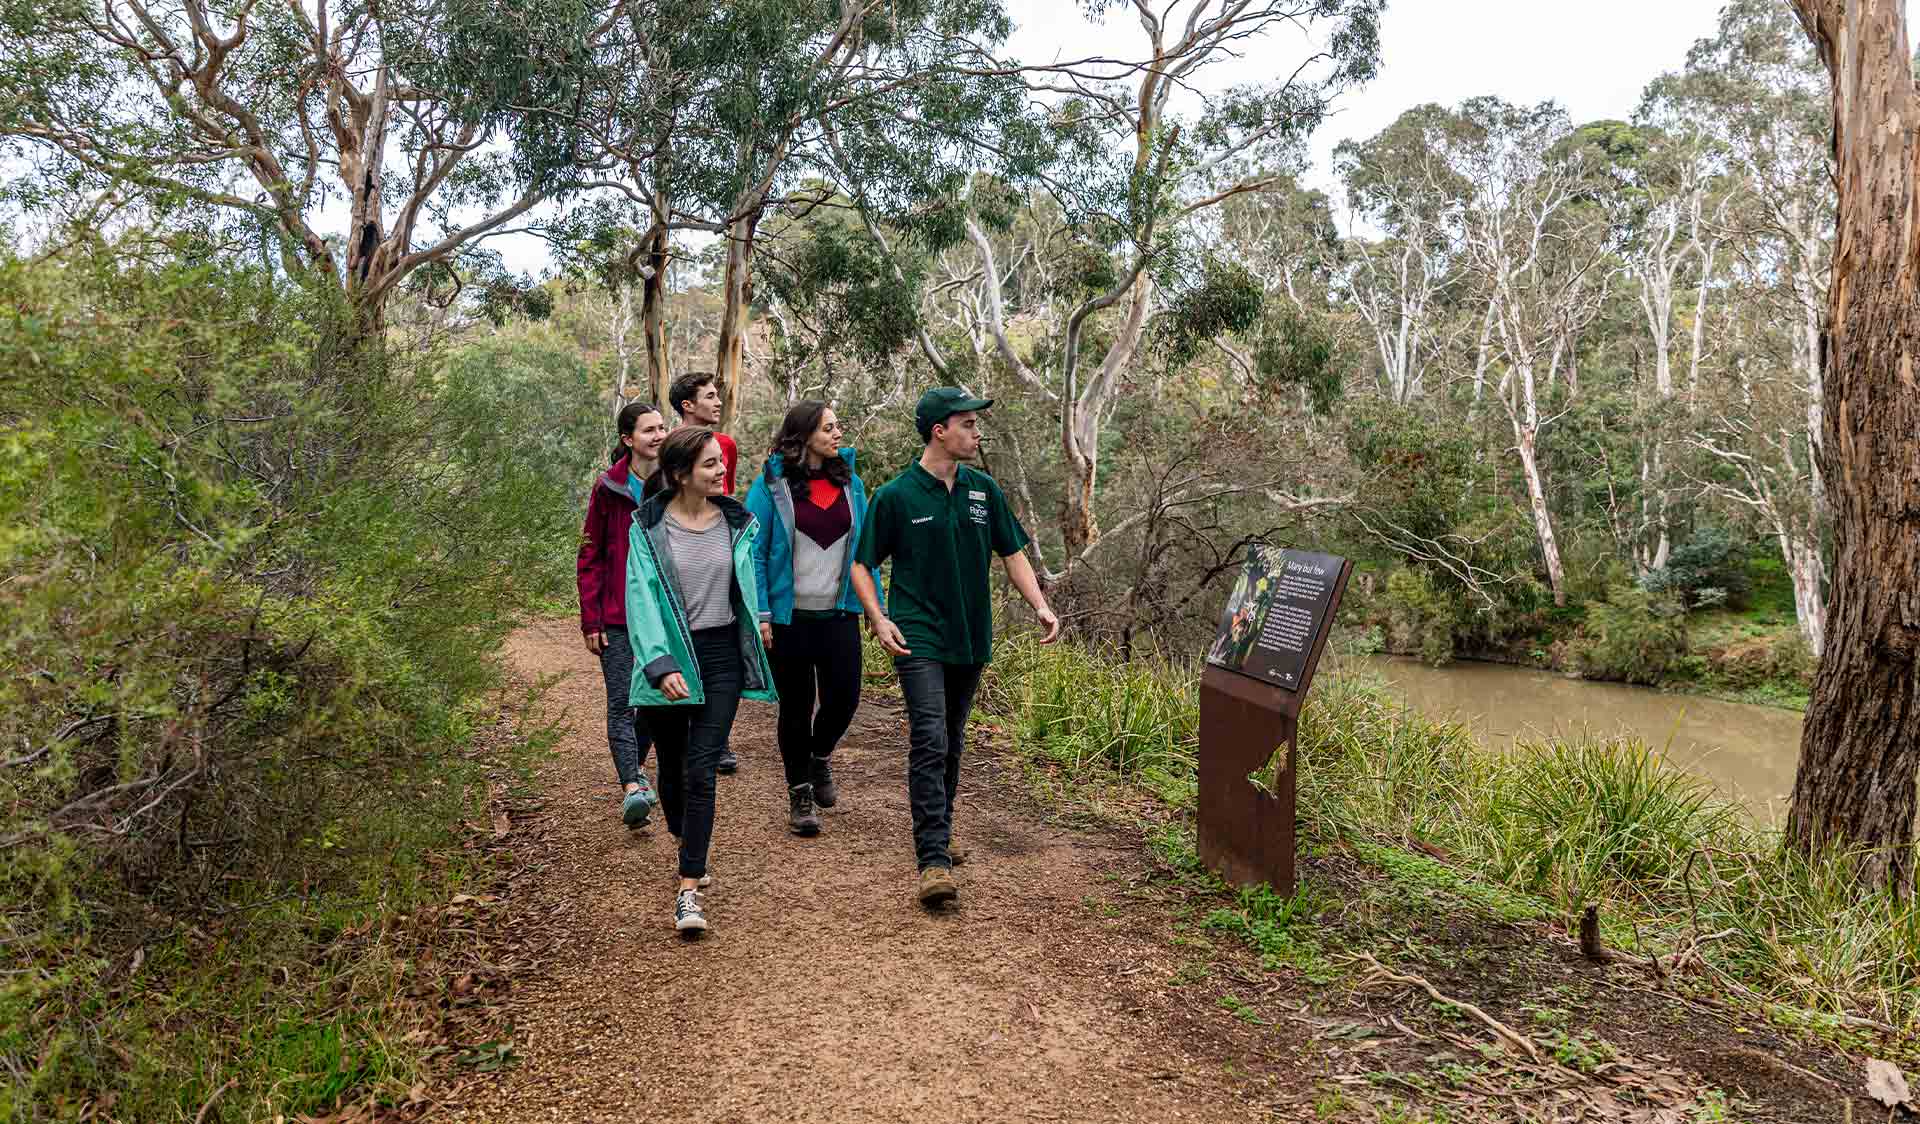 A group take a volunteer led tour through the Flying Fox environments on the banks of the Yarra River in Yarra Bend Park